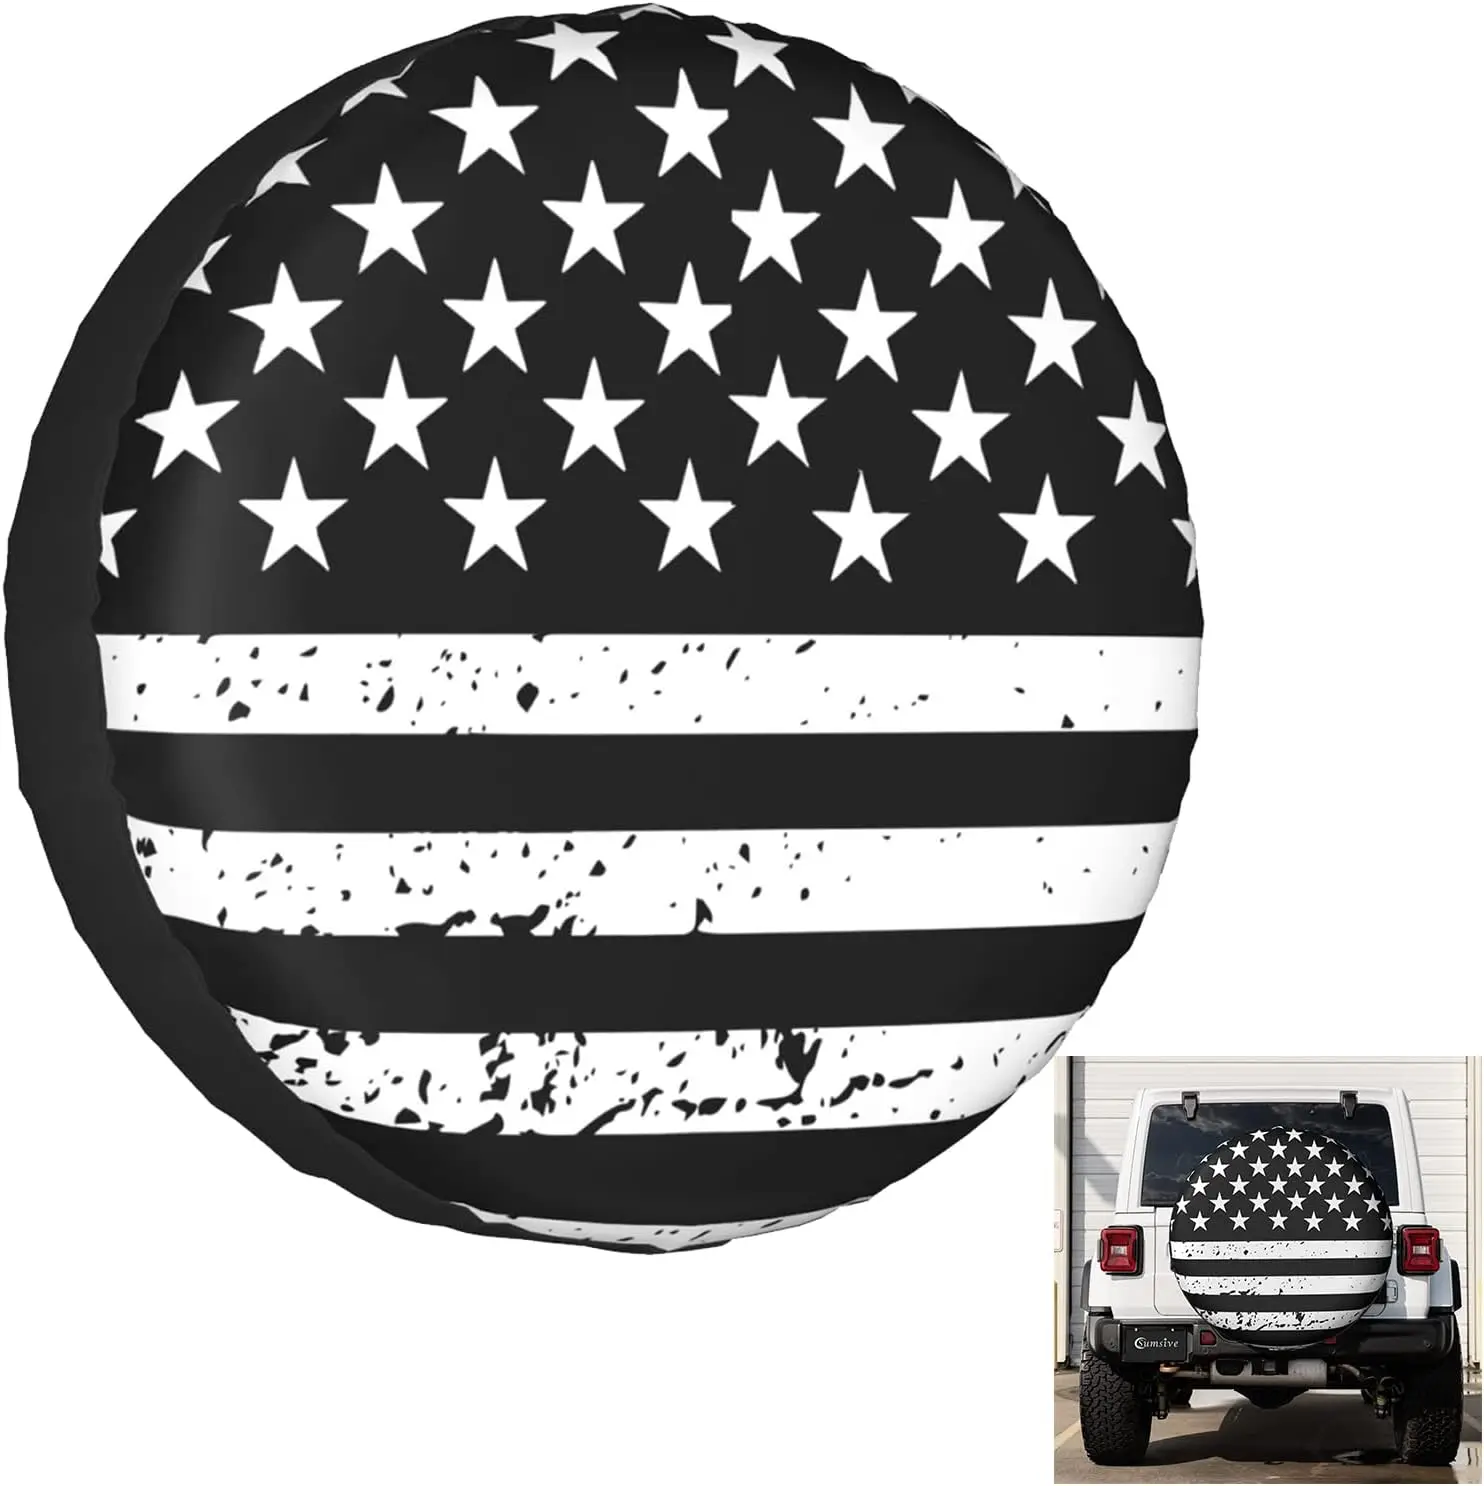 

Spare Tire Cover Wheel Covers for RV Tires Camper Tire Weatherproof Cover Protectors for Trailer Rv SUV Truck Travel Trailer